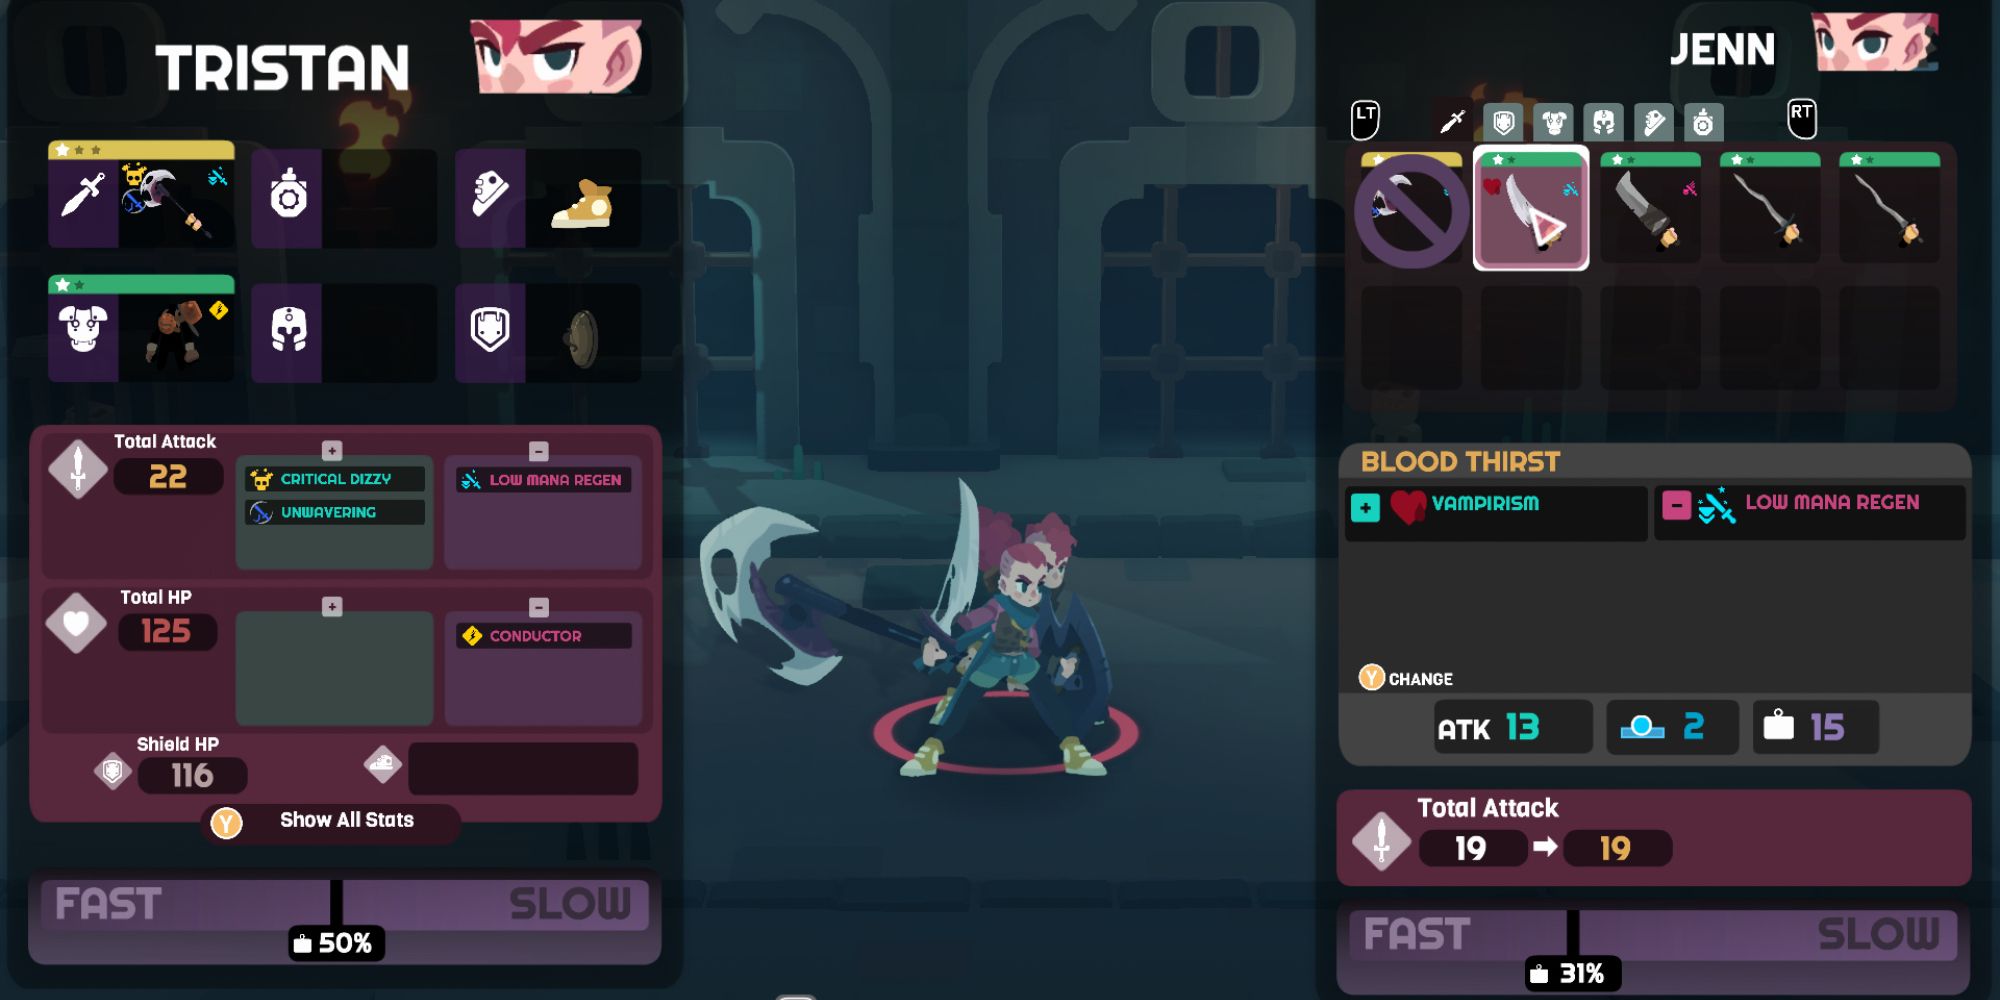 a shot of Tristan and Jenn wielding large weapons with their inventory menus on the right and left of the frame